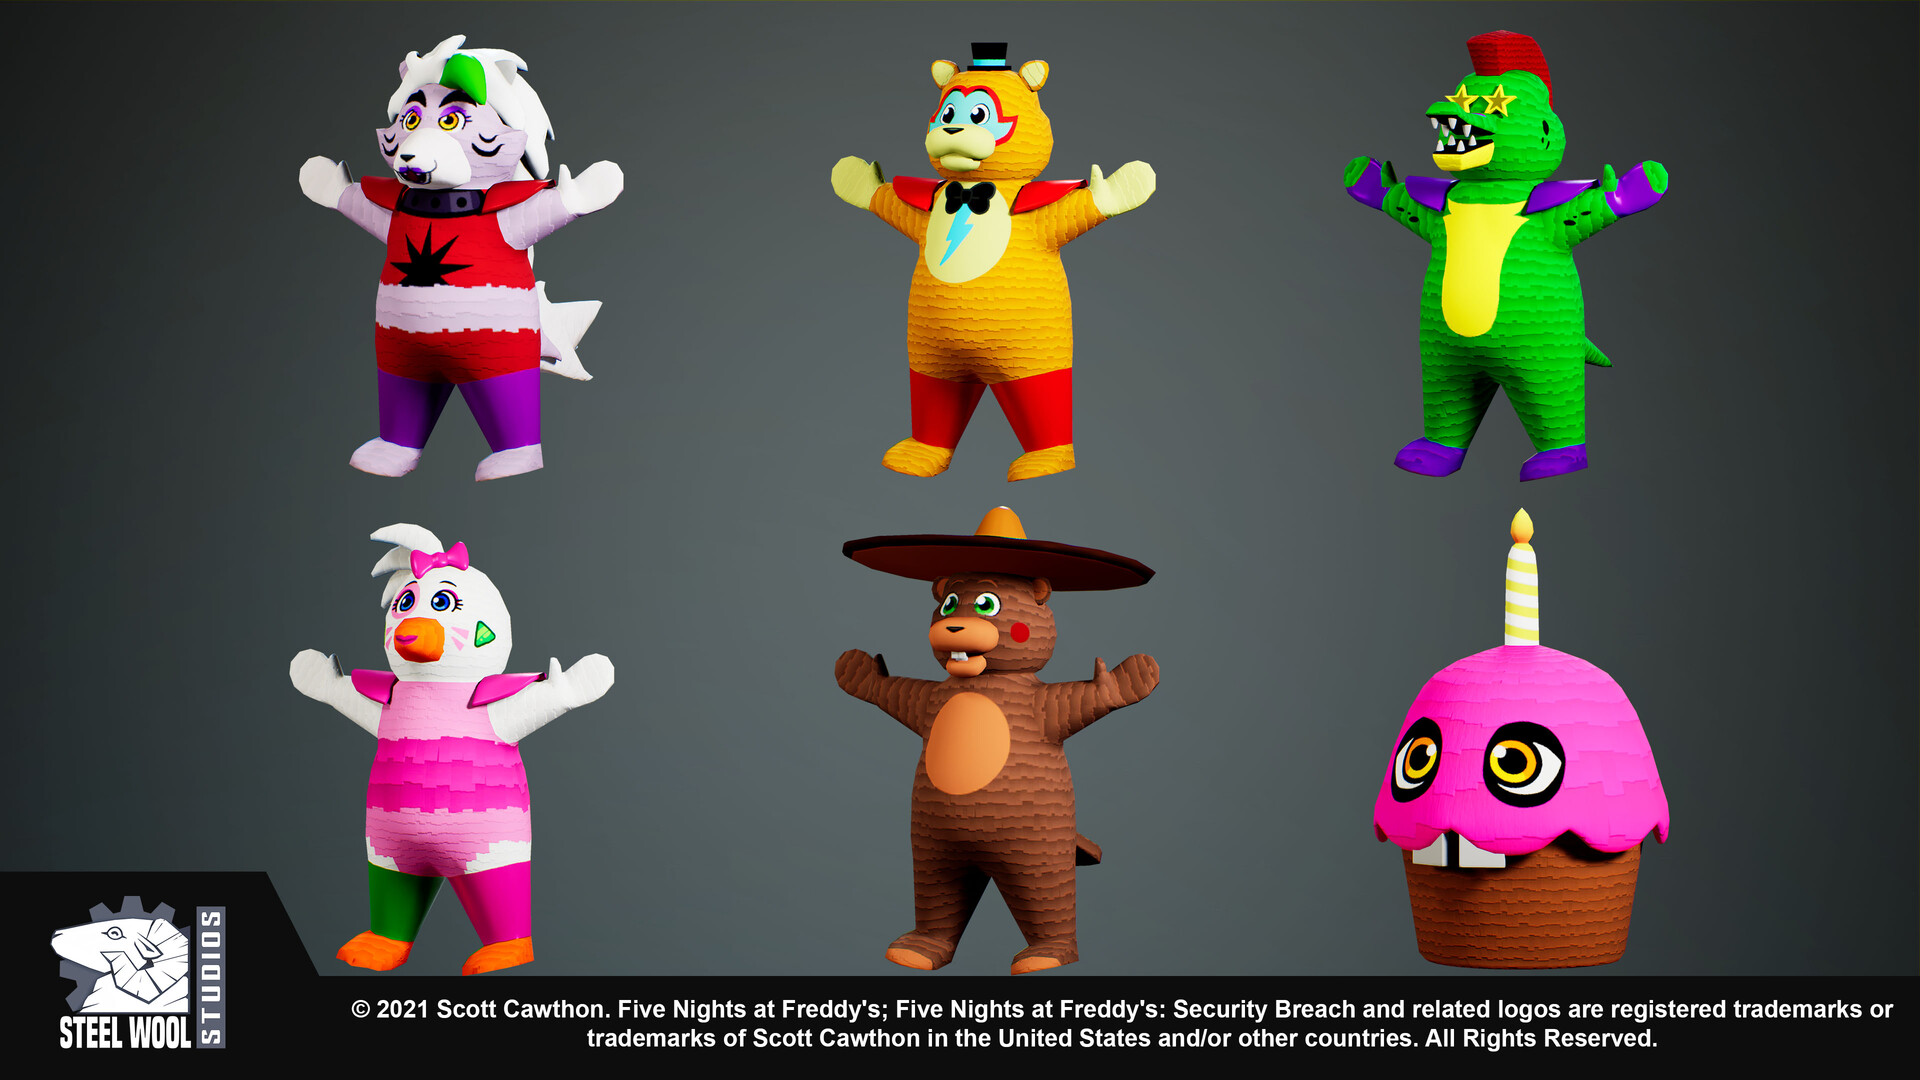 ArtStation - Five Nights at Freddy's Security Breach - Gregory